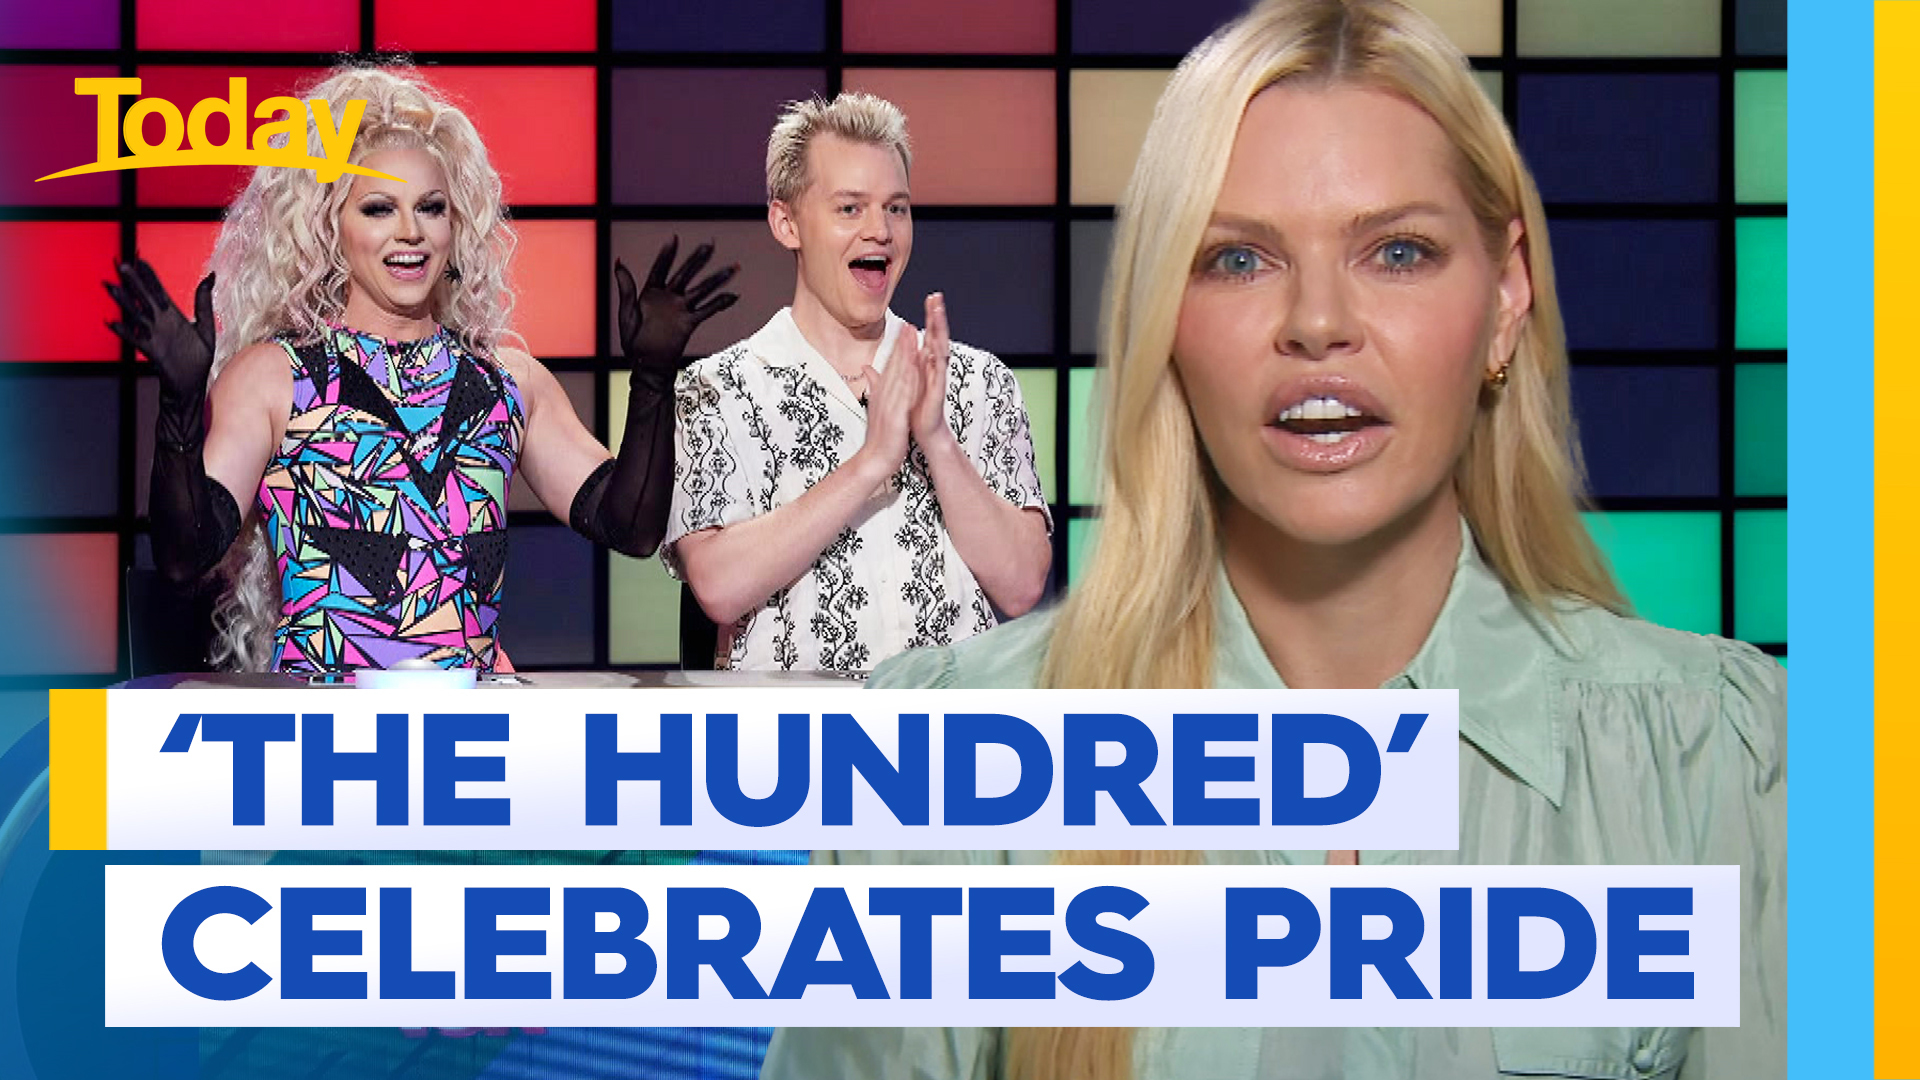 Sophie Monk's hilarious tease of The Hundred Pride Week